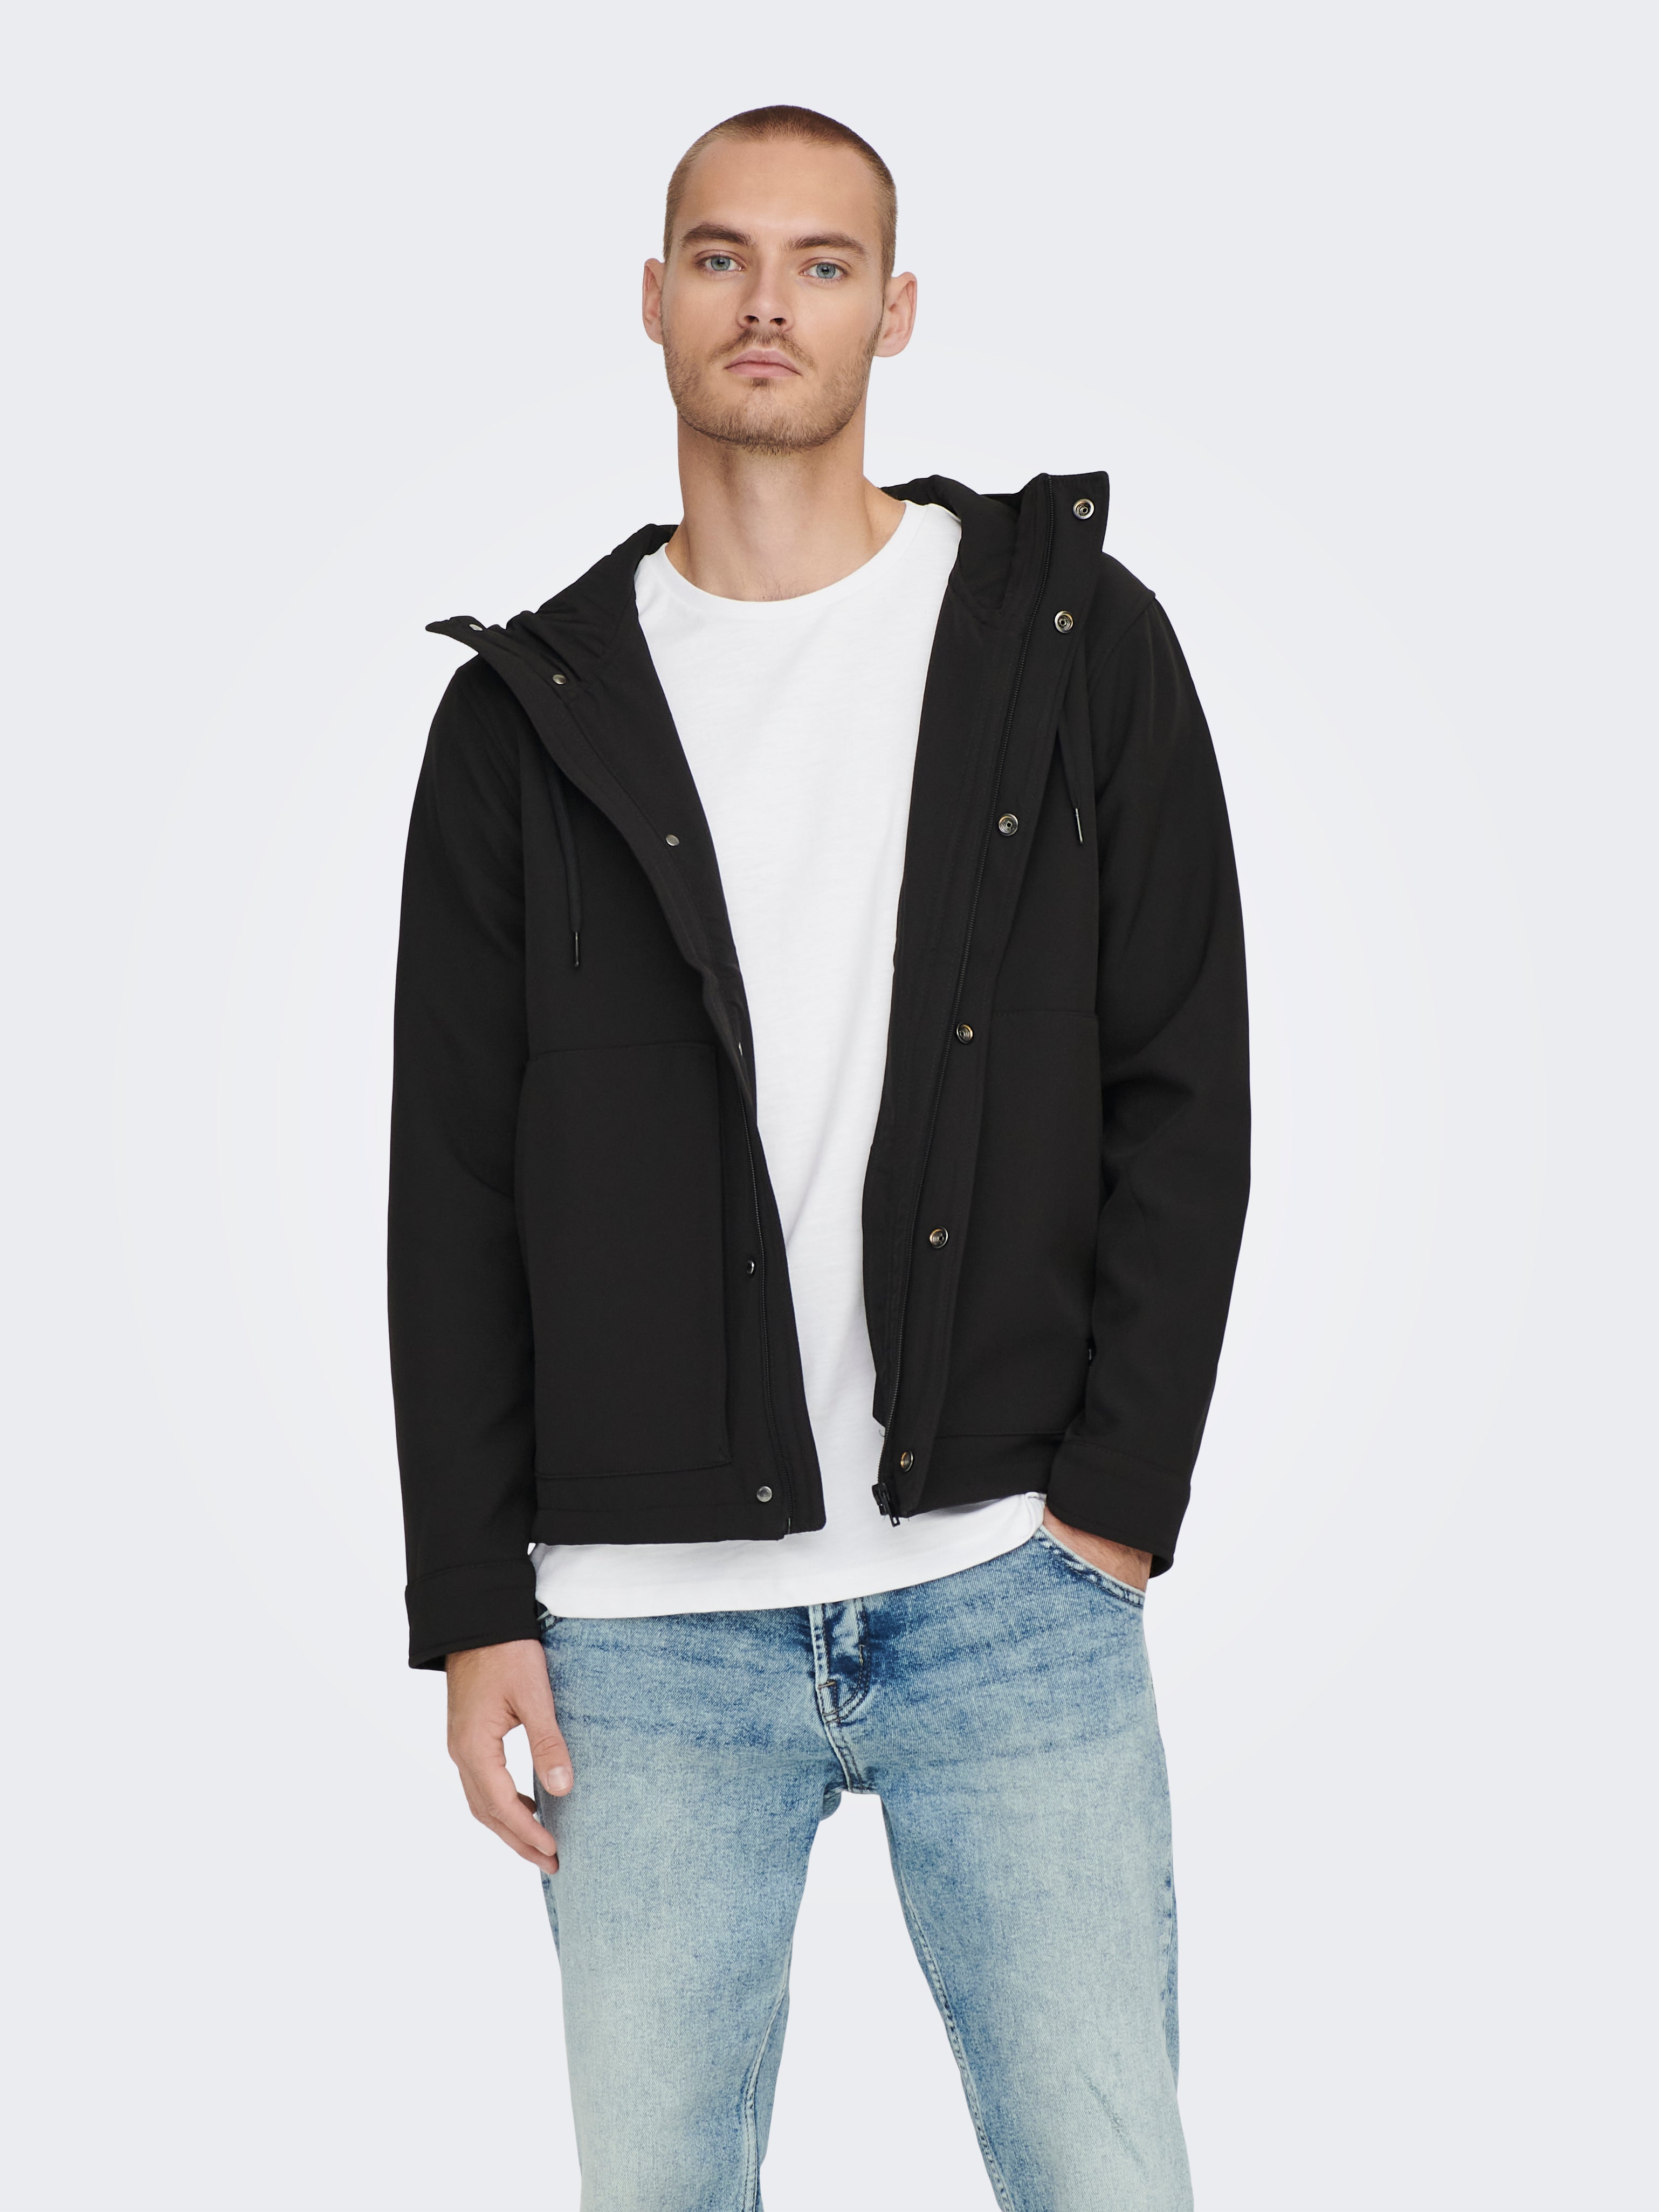 Softshell jacket | Black | ONLY & SONS®